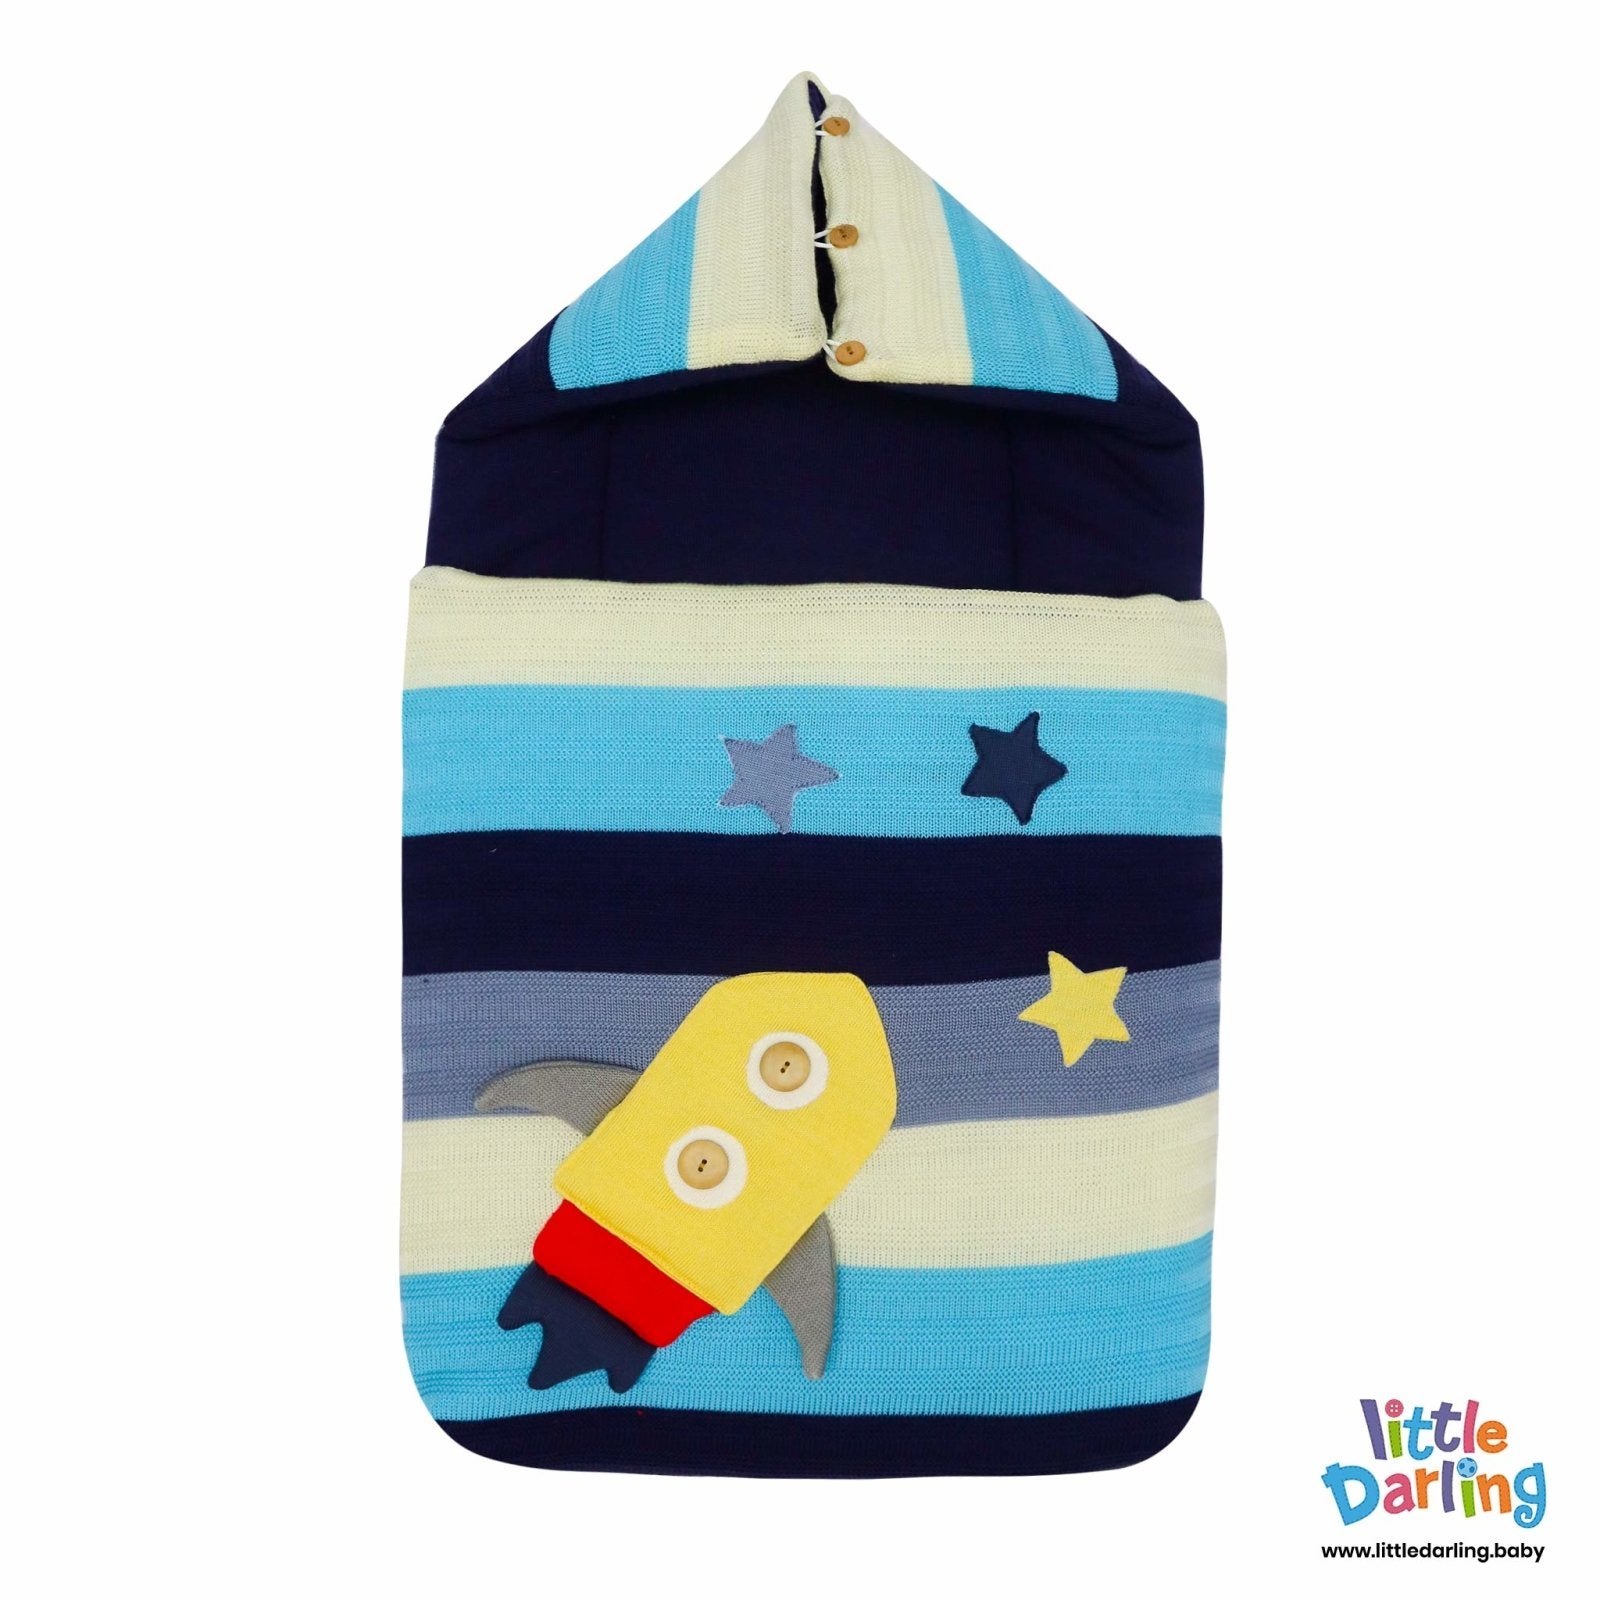 Hooded Baby Carry Nest With Pillow Embossed Rocket by Little Darling